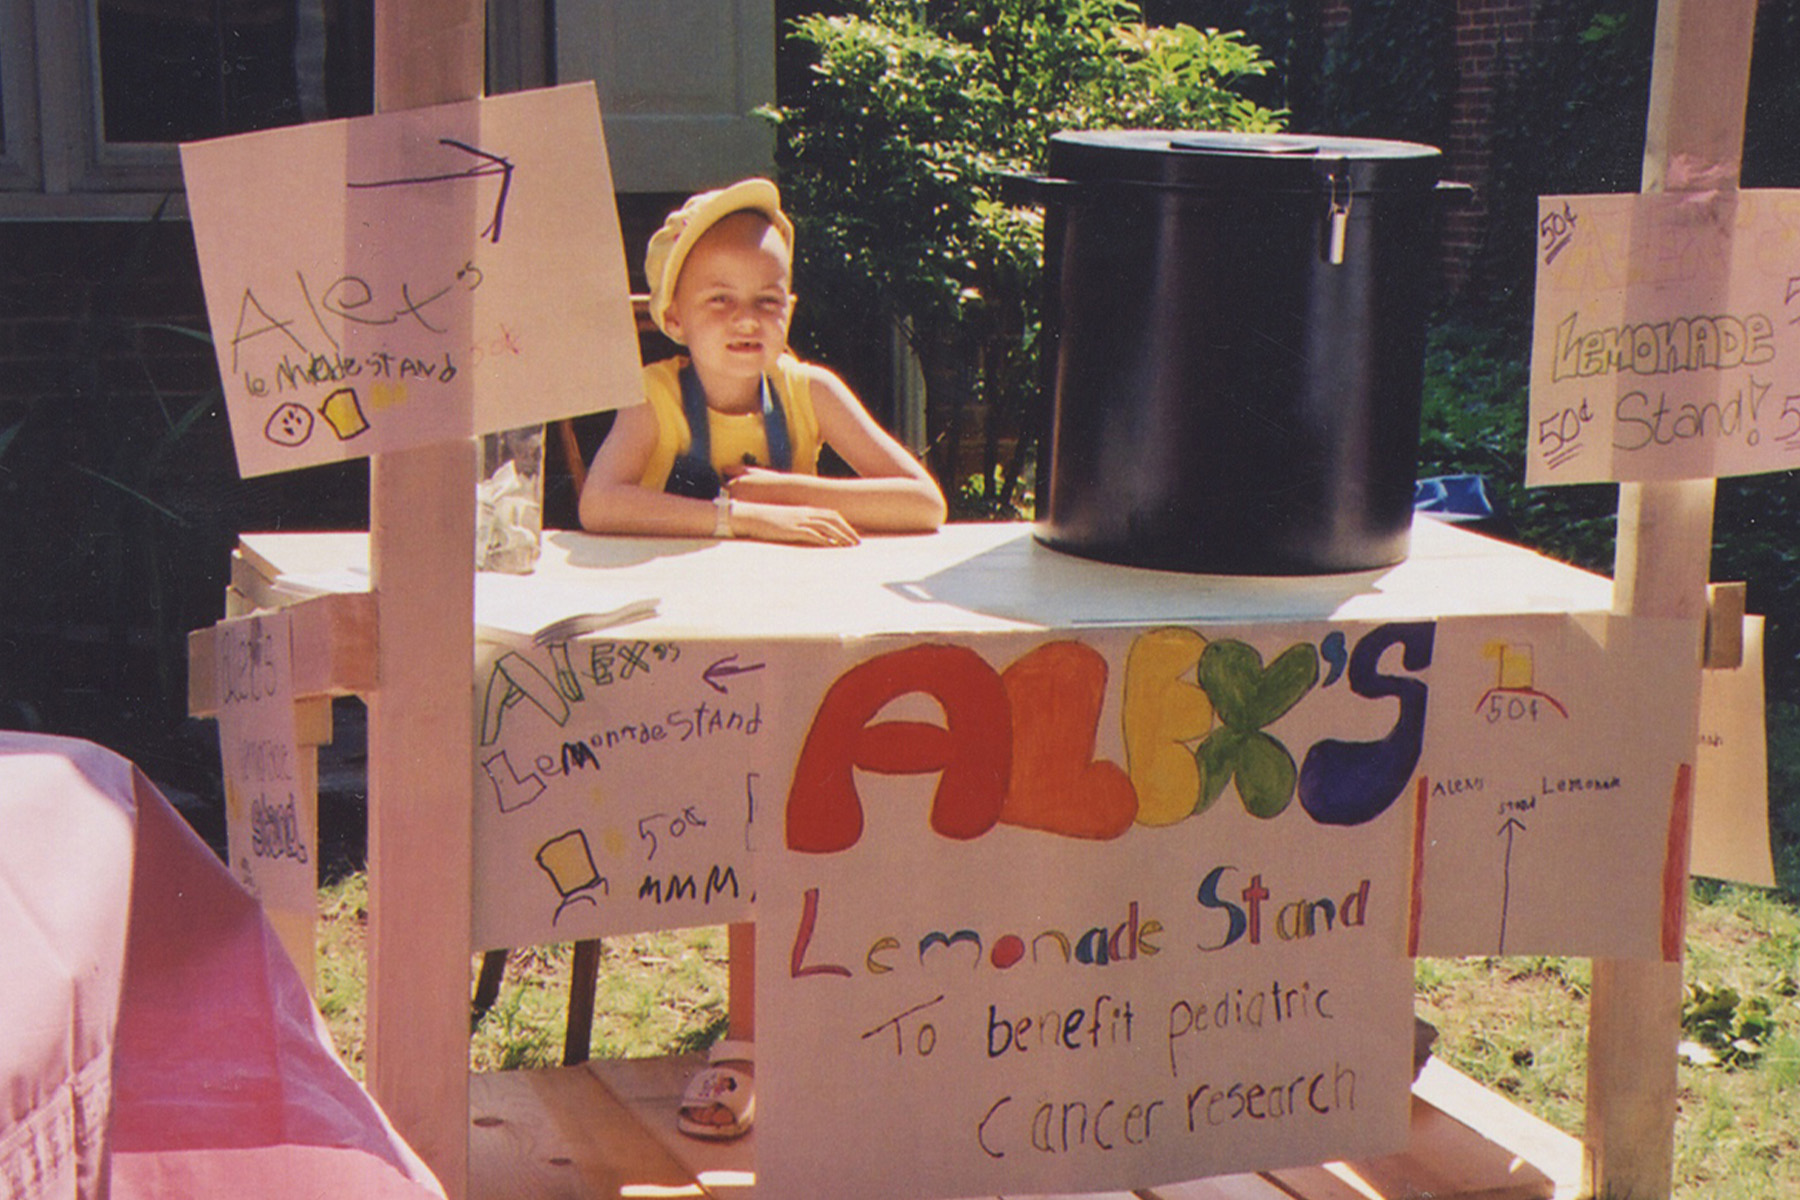 Alex Scott raising funds for cancer research at her first lemonade stand.